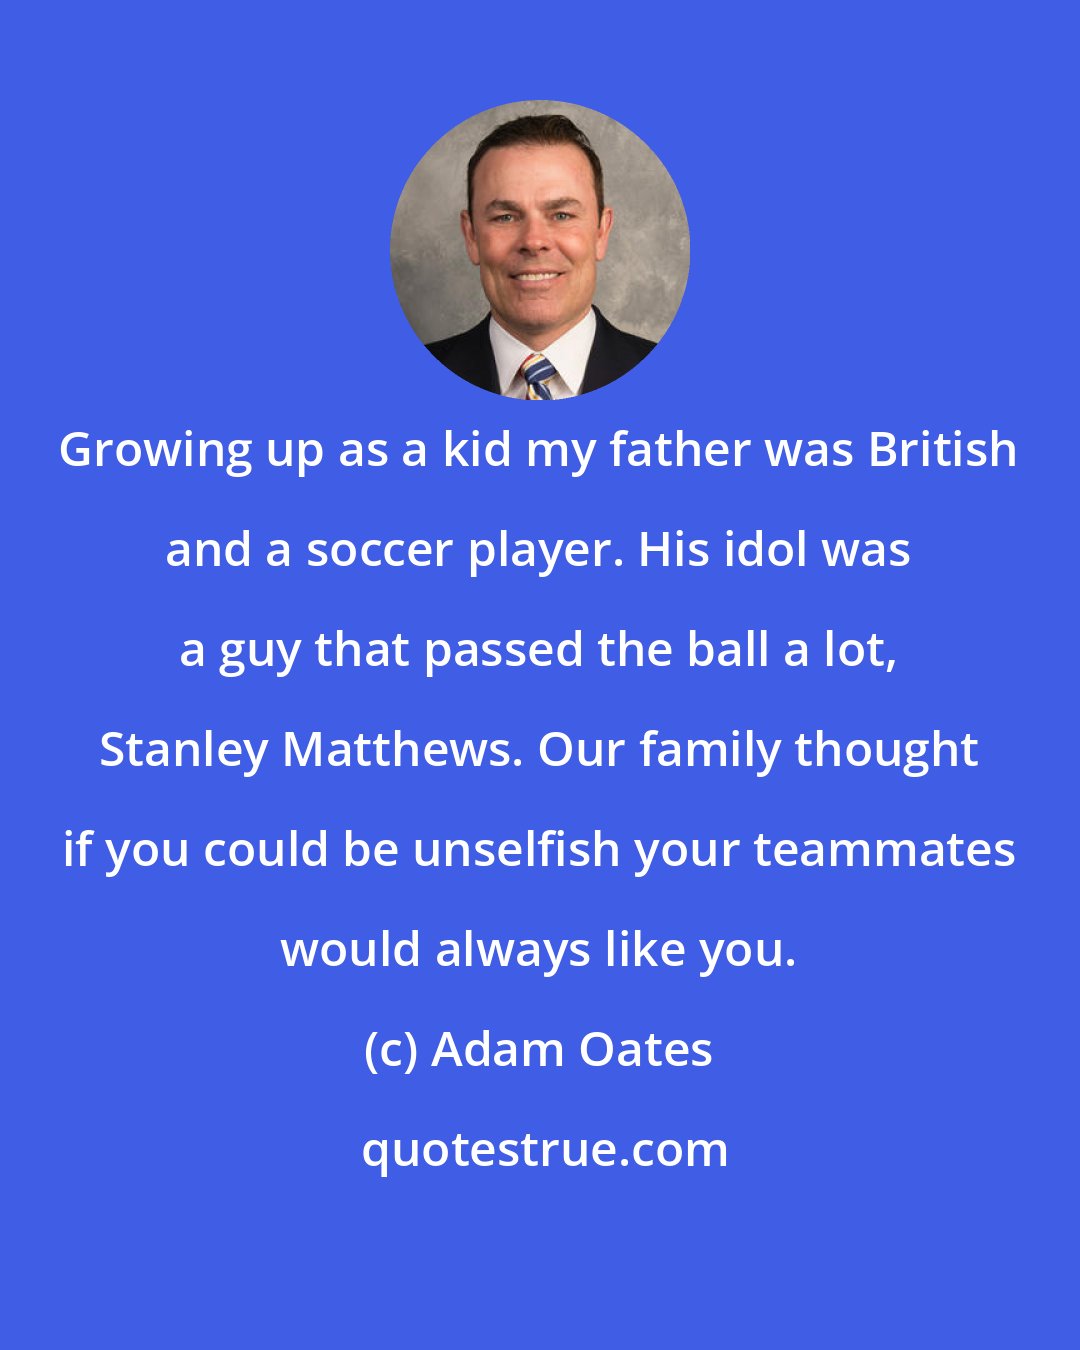 Adam Oates: Growing up as a kid my father was British and a soccer player. His idol was a guy that passed the ball a lot, Stanley Matthews. Our family thought if you could be unselfish your teammates would always like you.